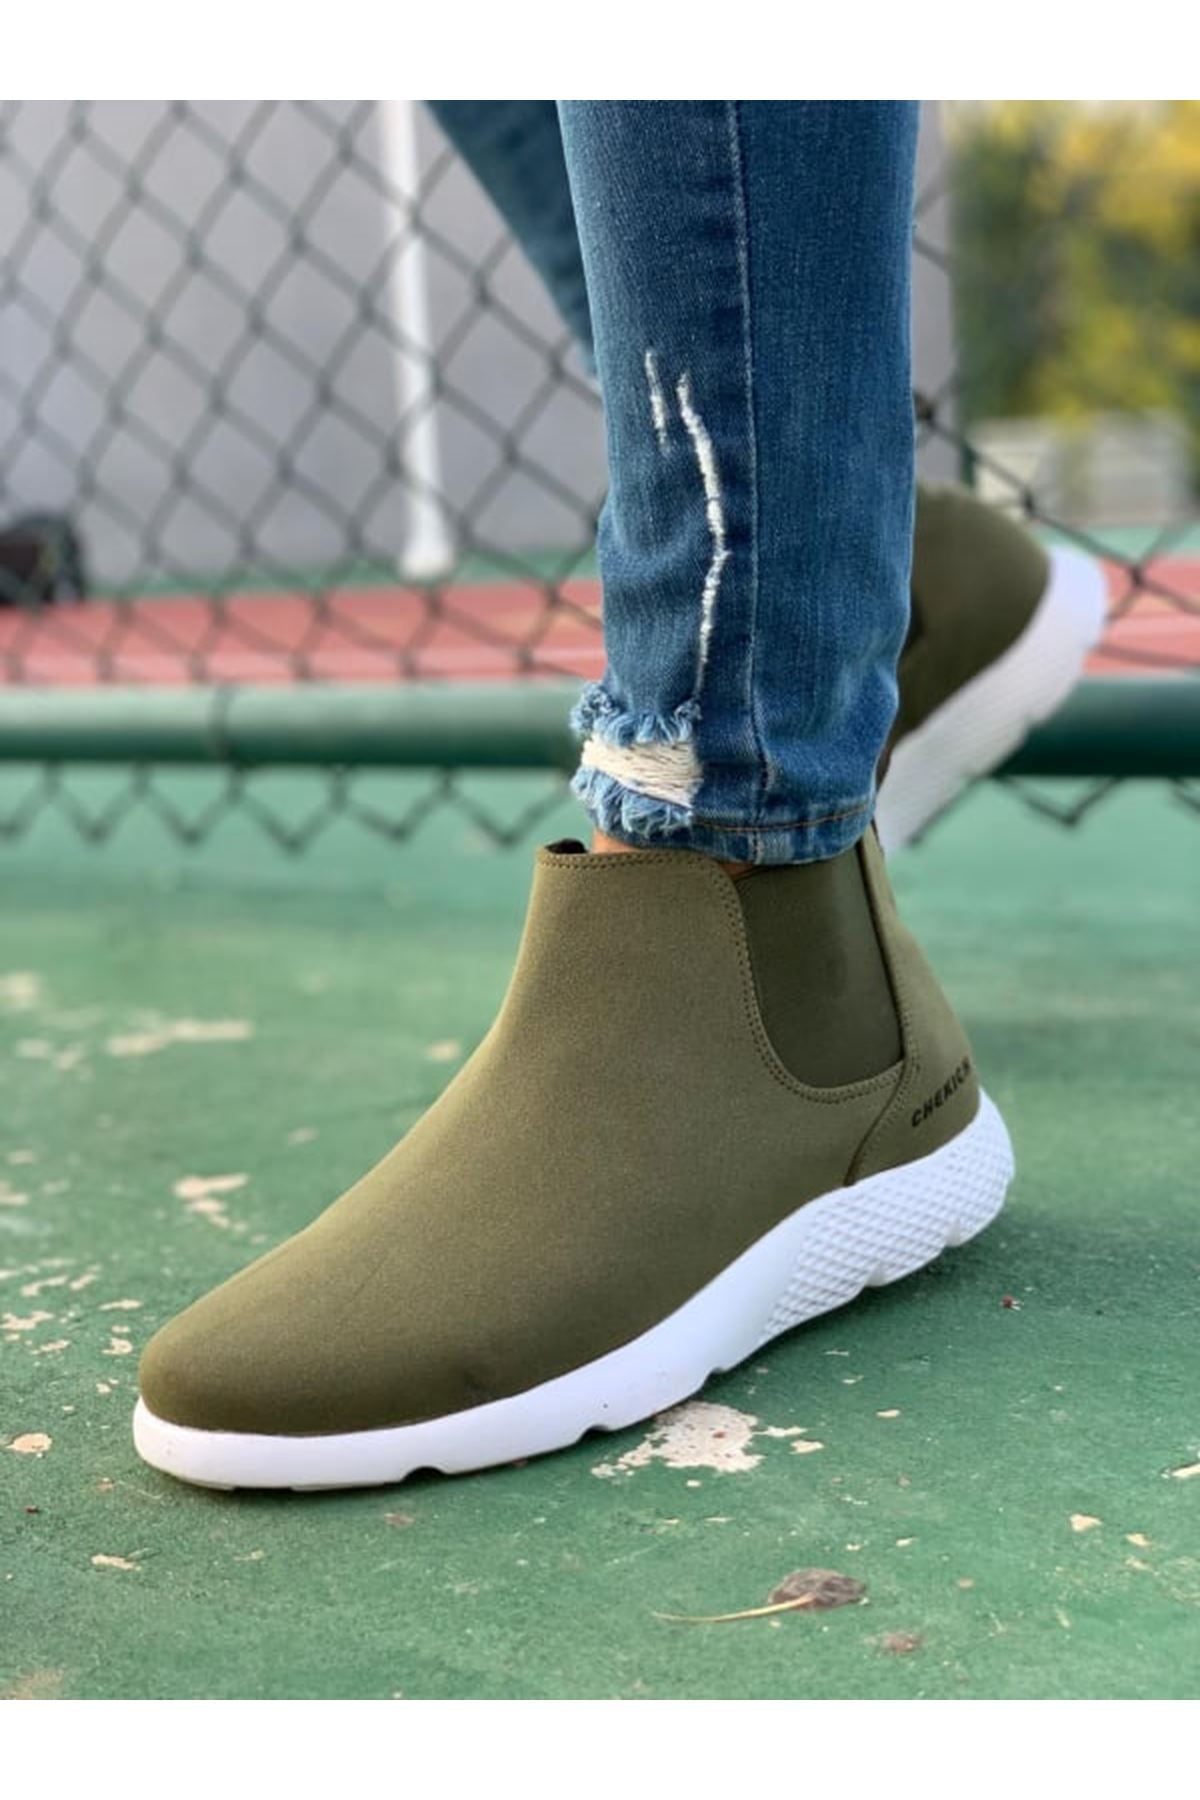 CH049 Men's Suede Khaki-White Sole Streetstyle Casual Sneaker Sports Boots - STREETMODE ™